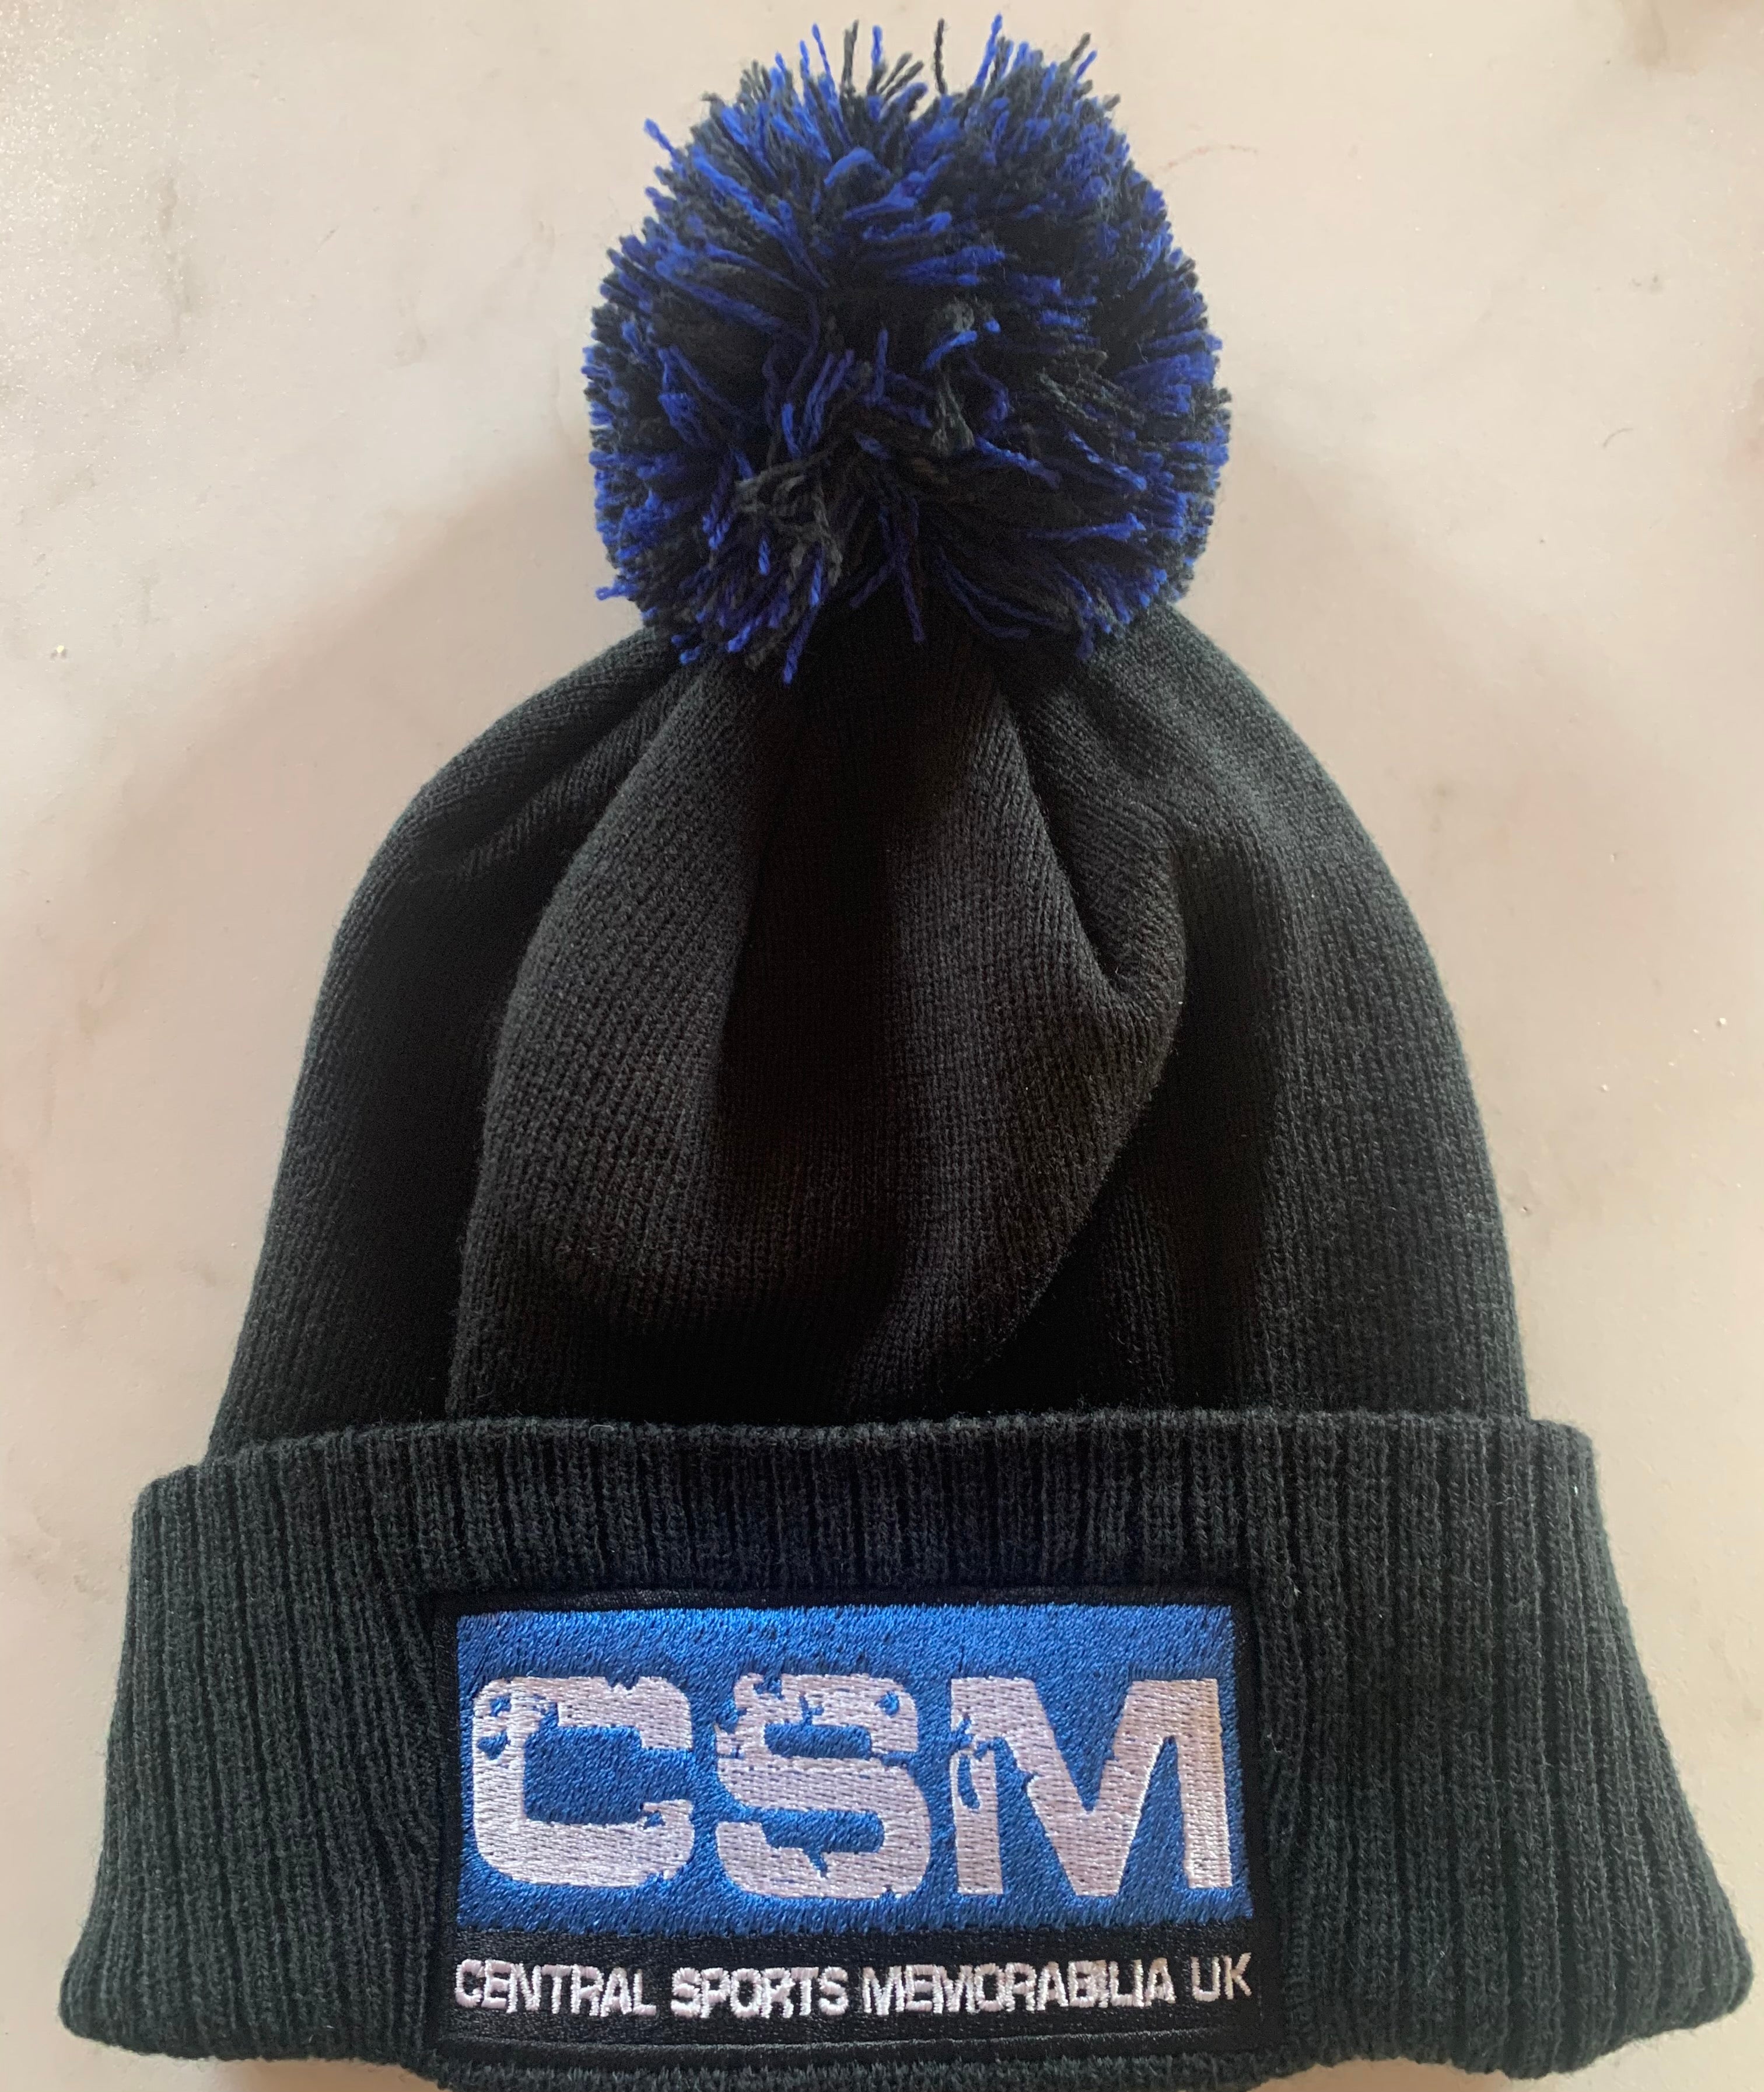 CSM Bobble Hat - Helping The Homeless - £5 donation to Birmingham Homeless Support Team